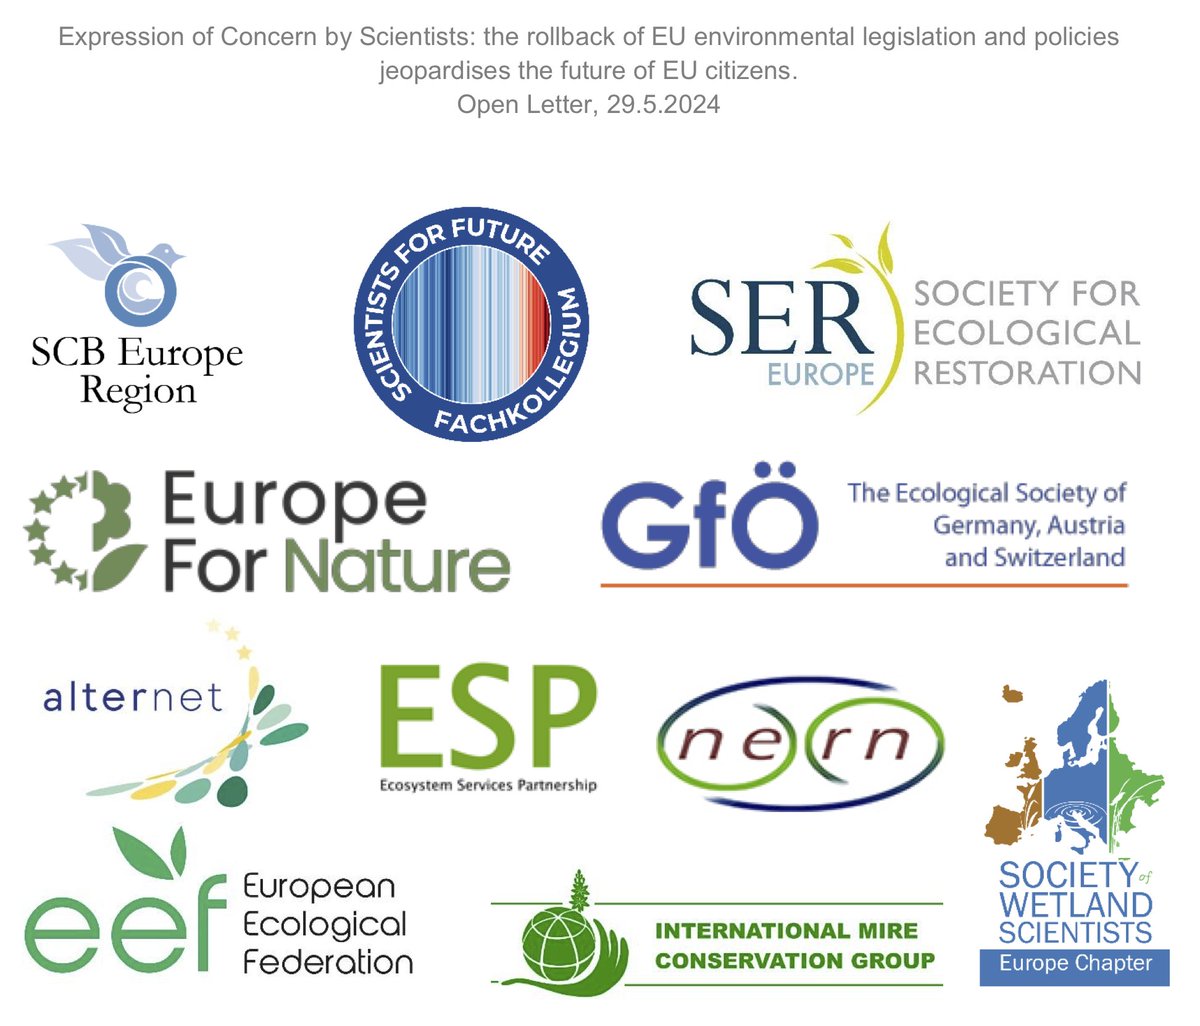 'We [...] call on citizens, civil-society organisations and political parties to support responsible policymaking that secures a safe(r) future within our planetary boundaries.' #BiosphereActionNOW! zenodo.org/records/113734…